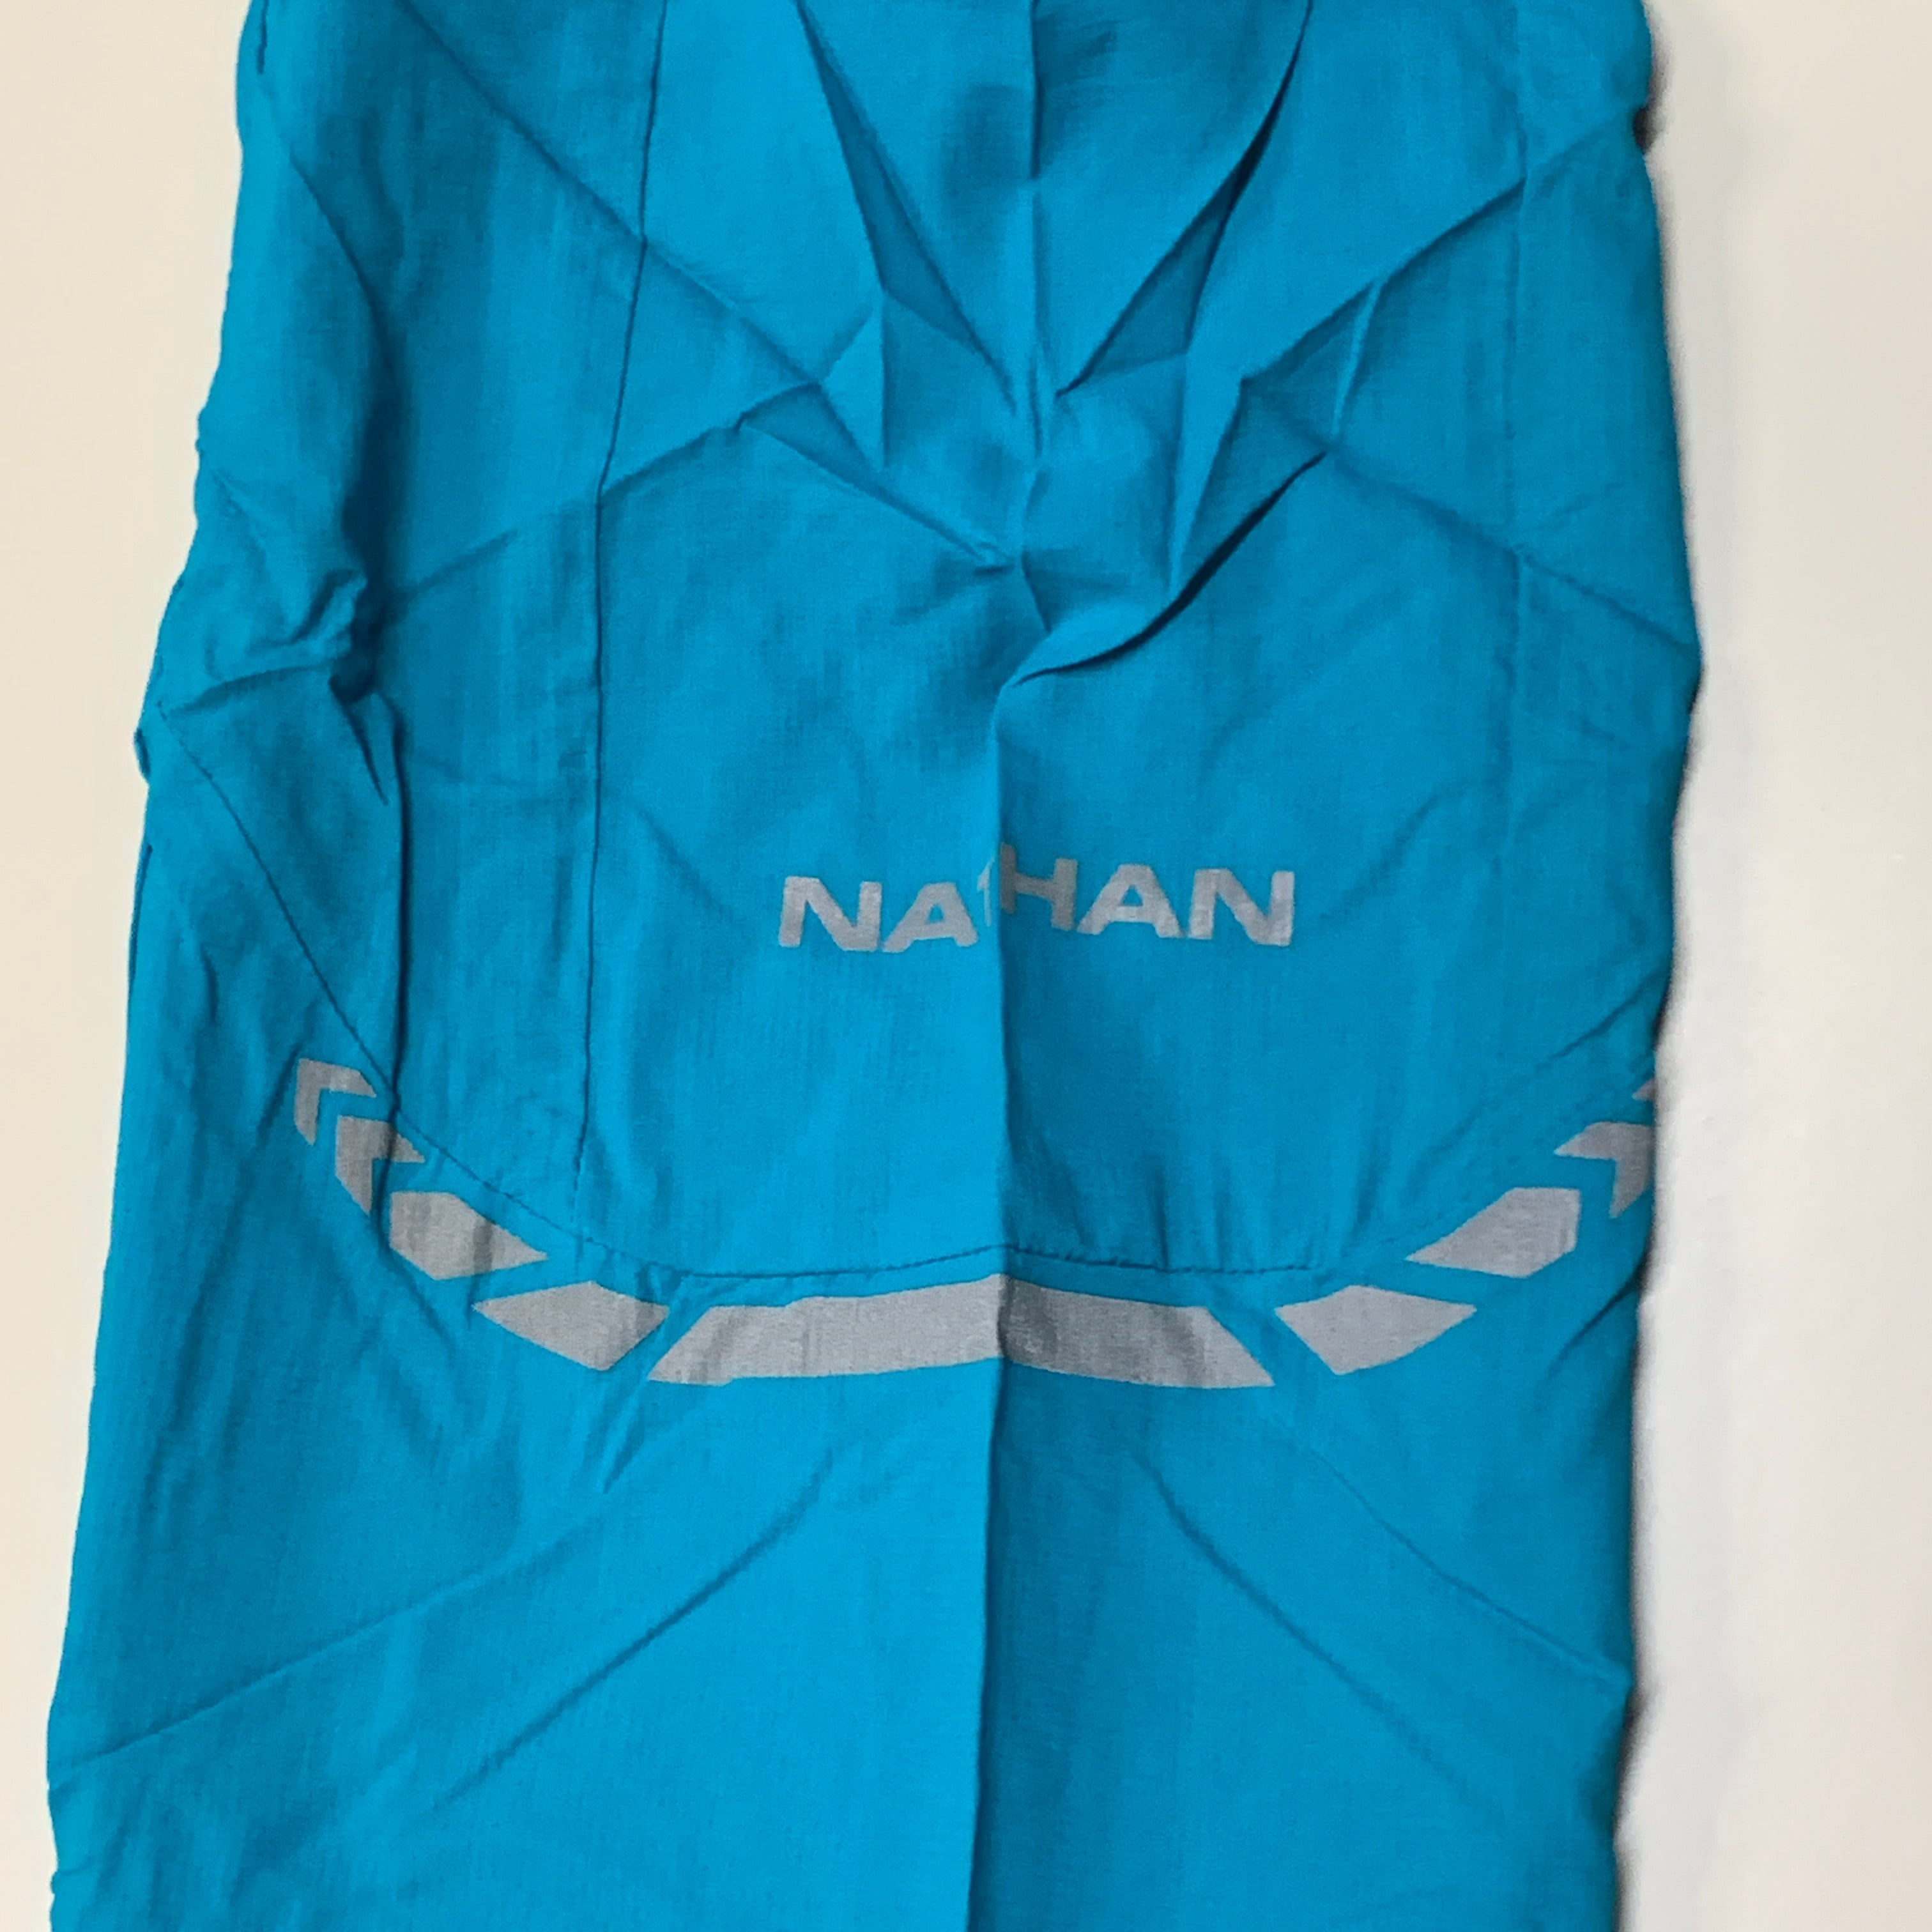 NATHAN Stealth Jacket W/ Hood Women's Bright Teal Size XL NS90080 